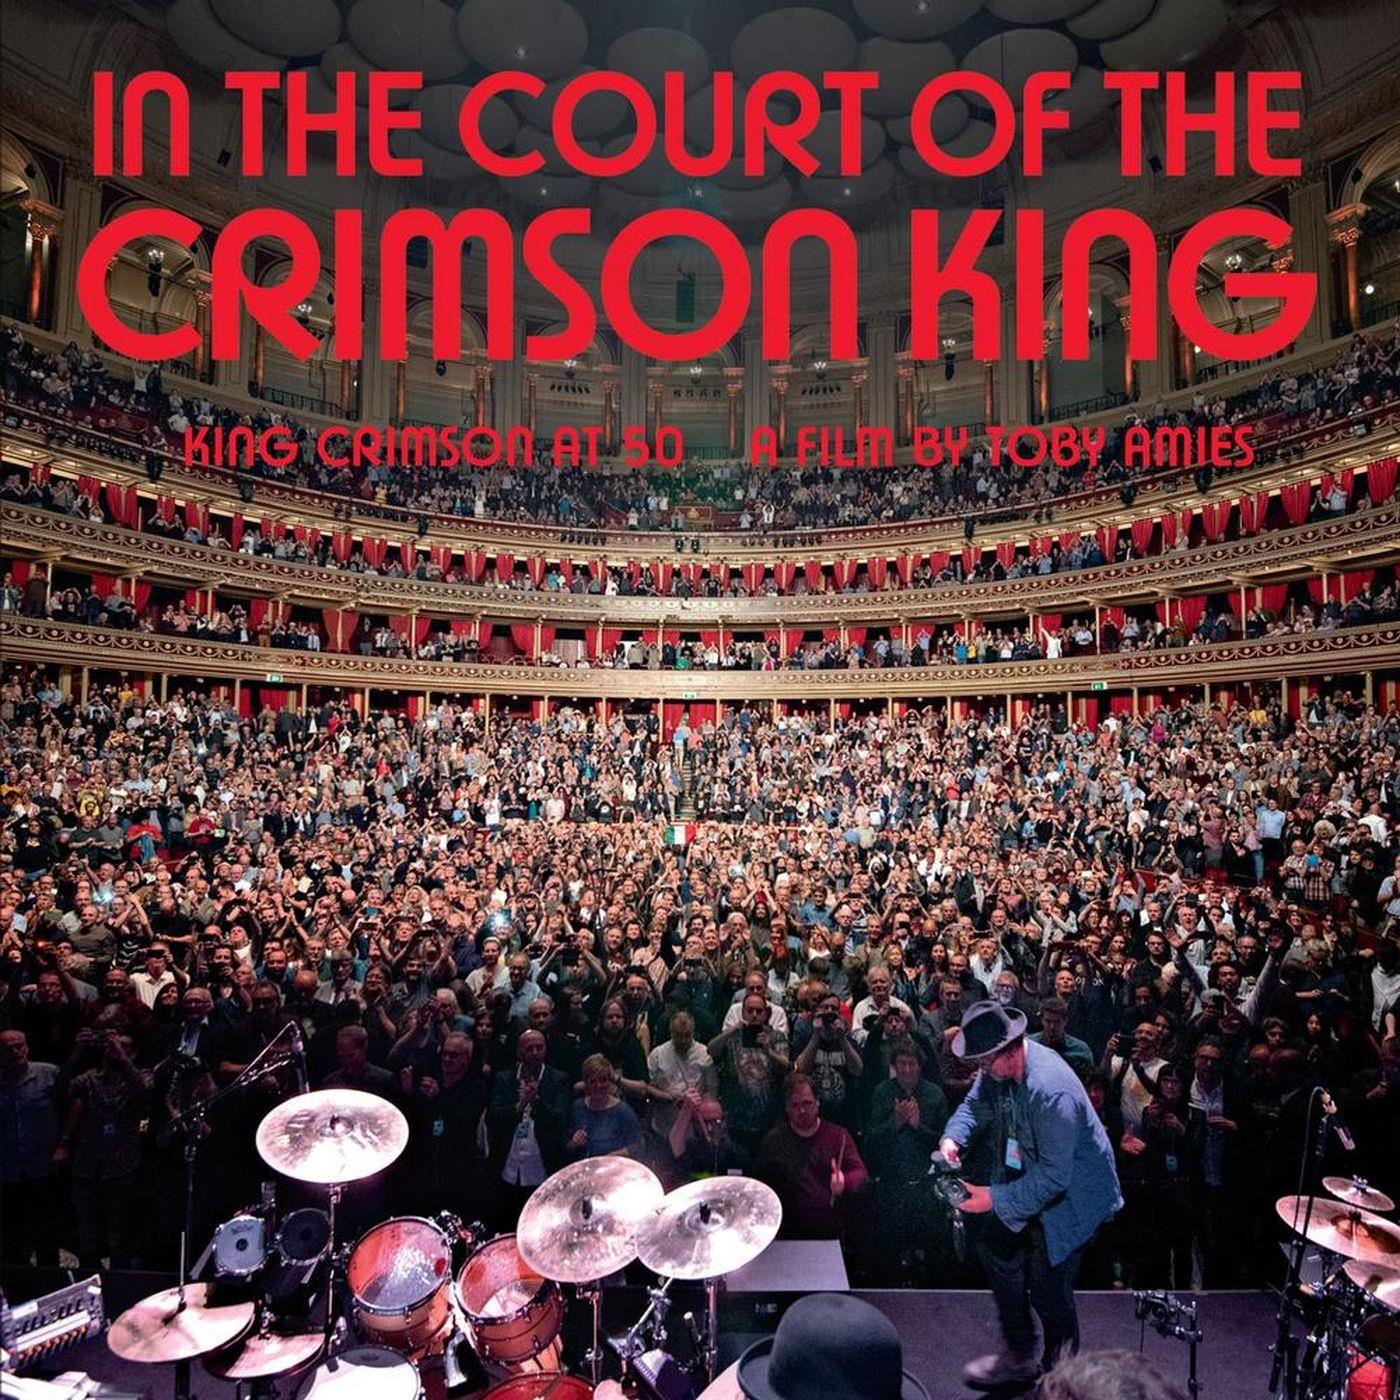 In The Court Of The Crimson King: King Crimson At 50 - A Film By Toby Amies  (Visual Pack) (Import) - JB Hi-Fi